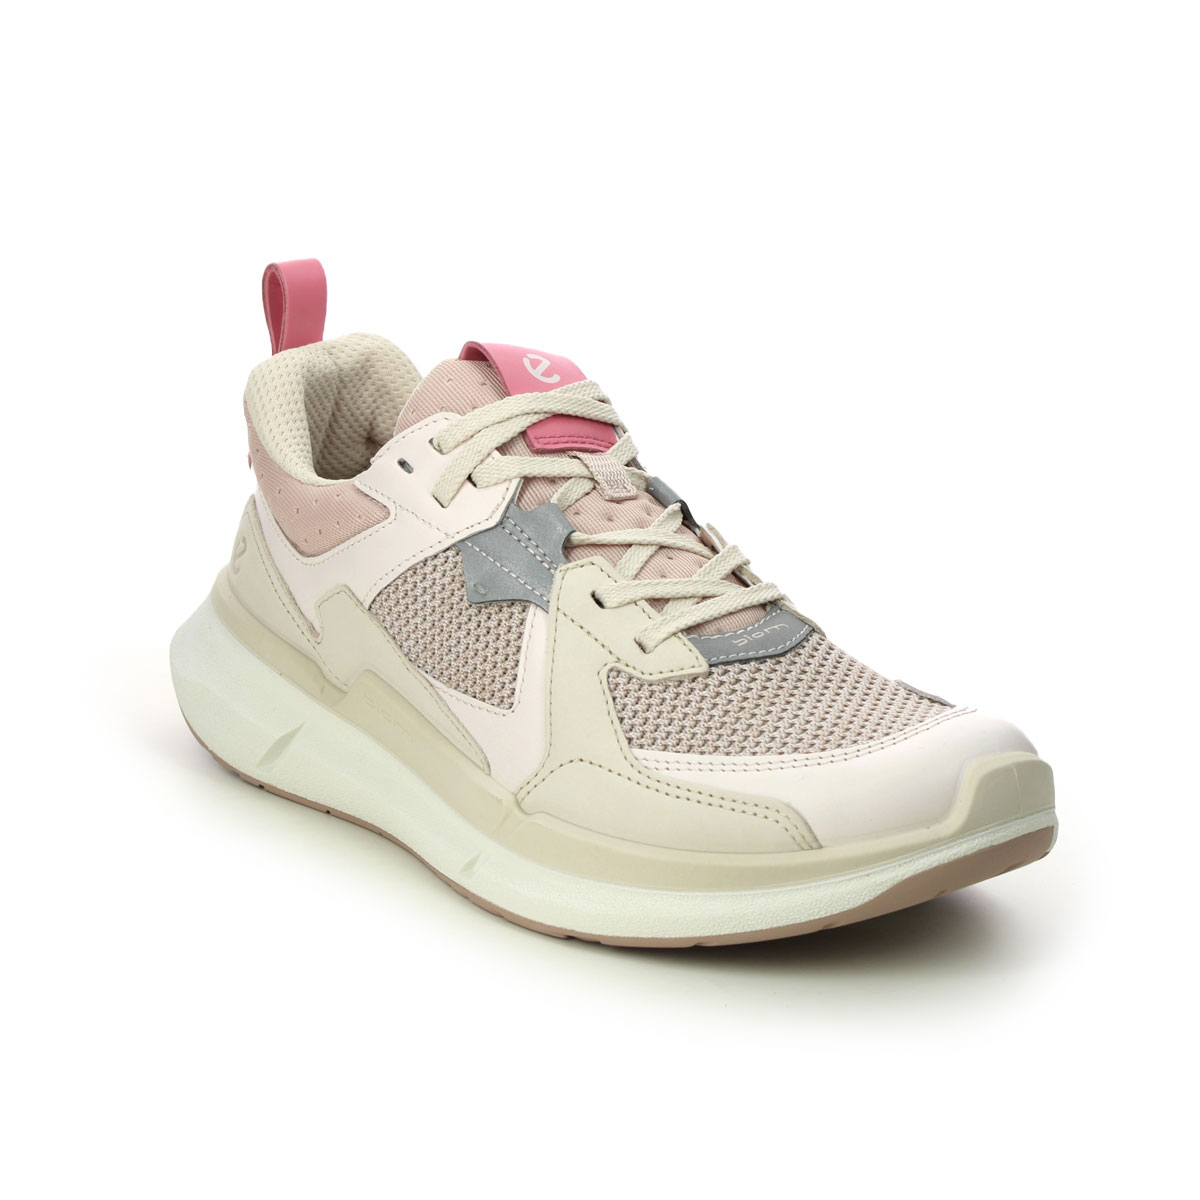 ECCO Biom 2.2 Ladies Rose leather Womens trainers 830773-60942 in a Plain Leather in Size 40